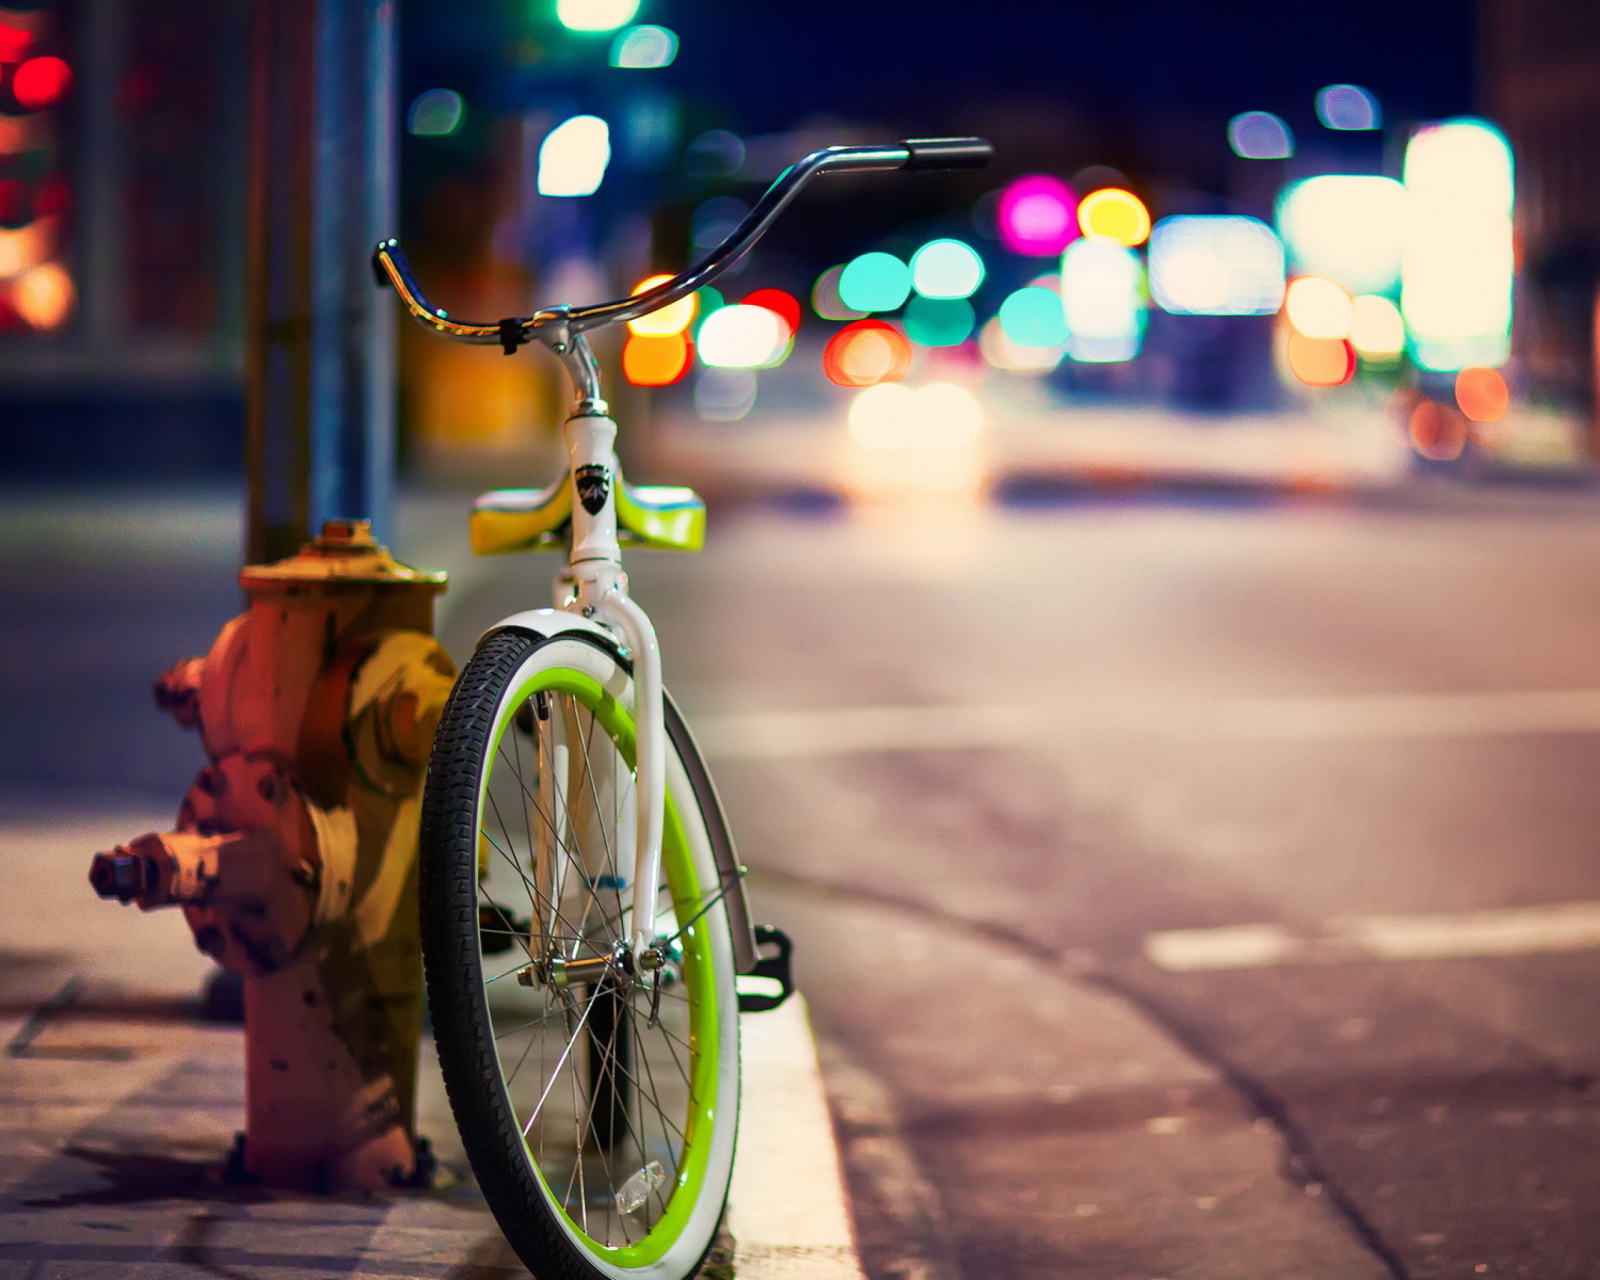 Green Bicycle In City Lights wallpaper 1600x1280